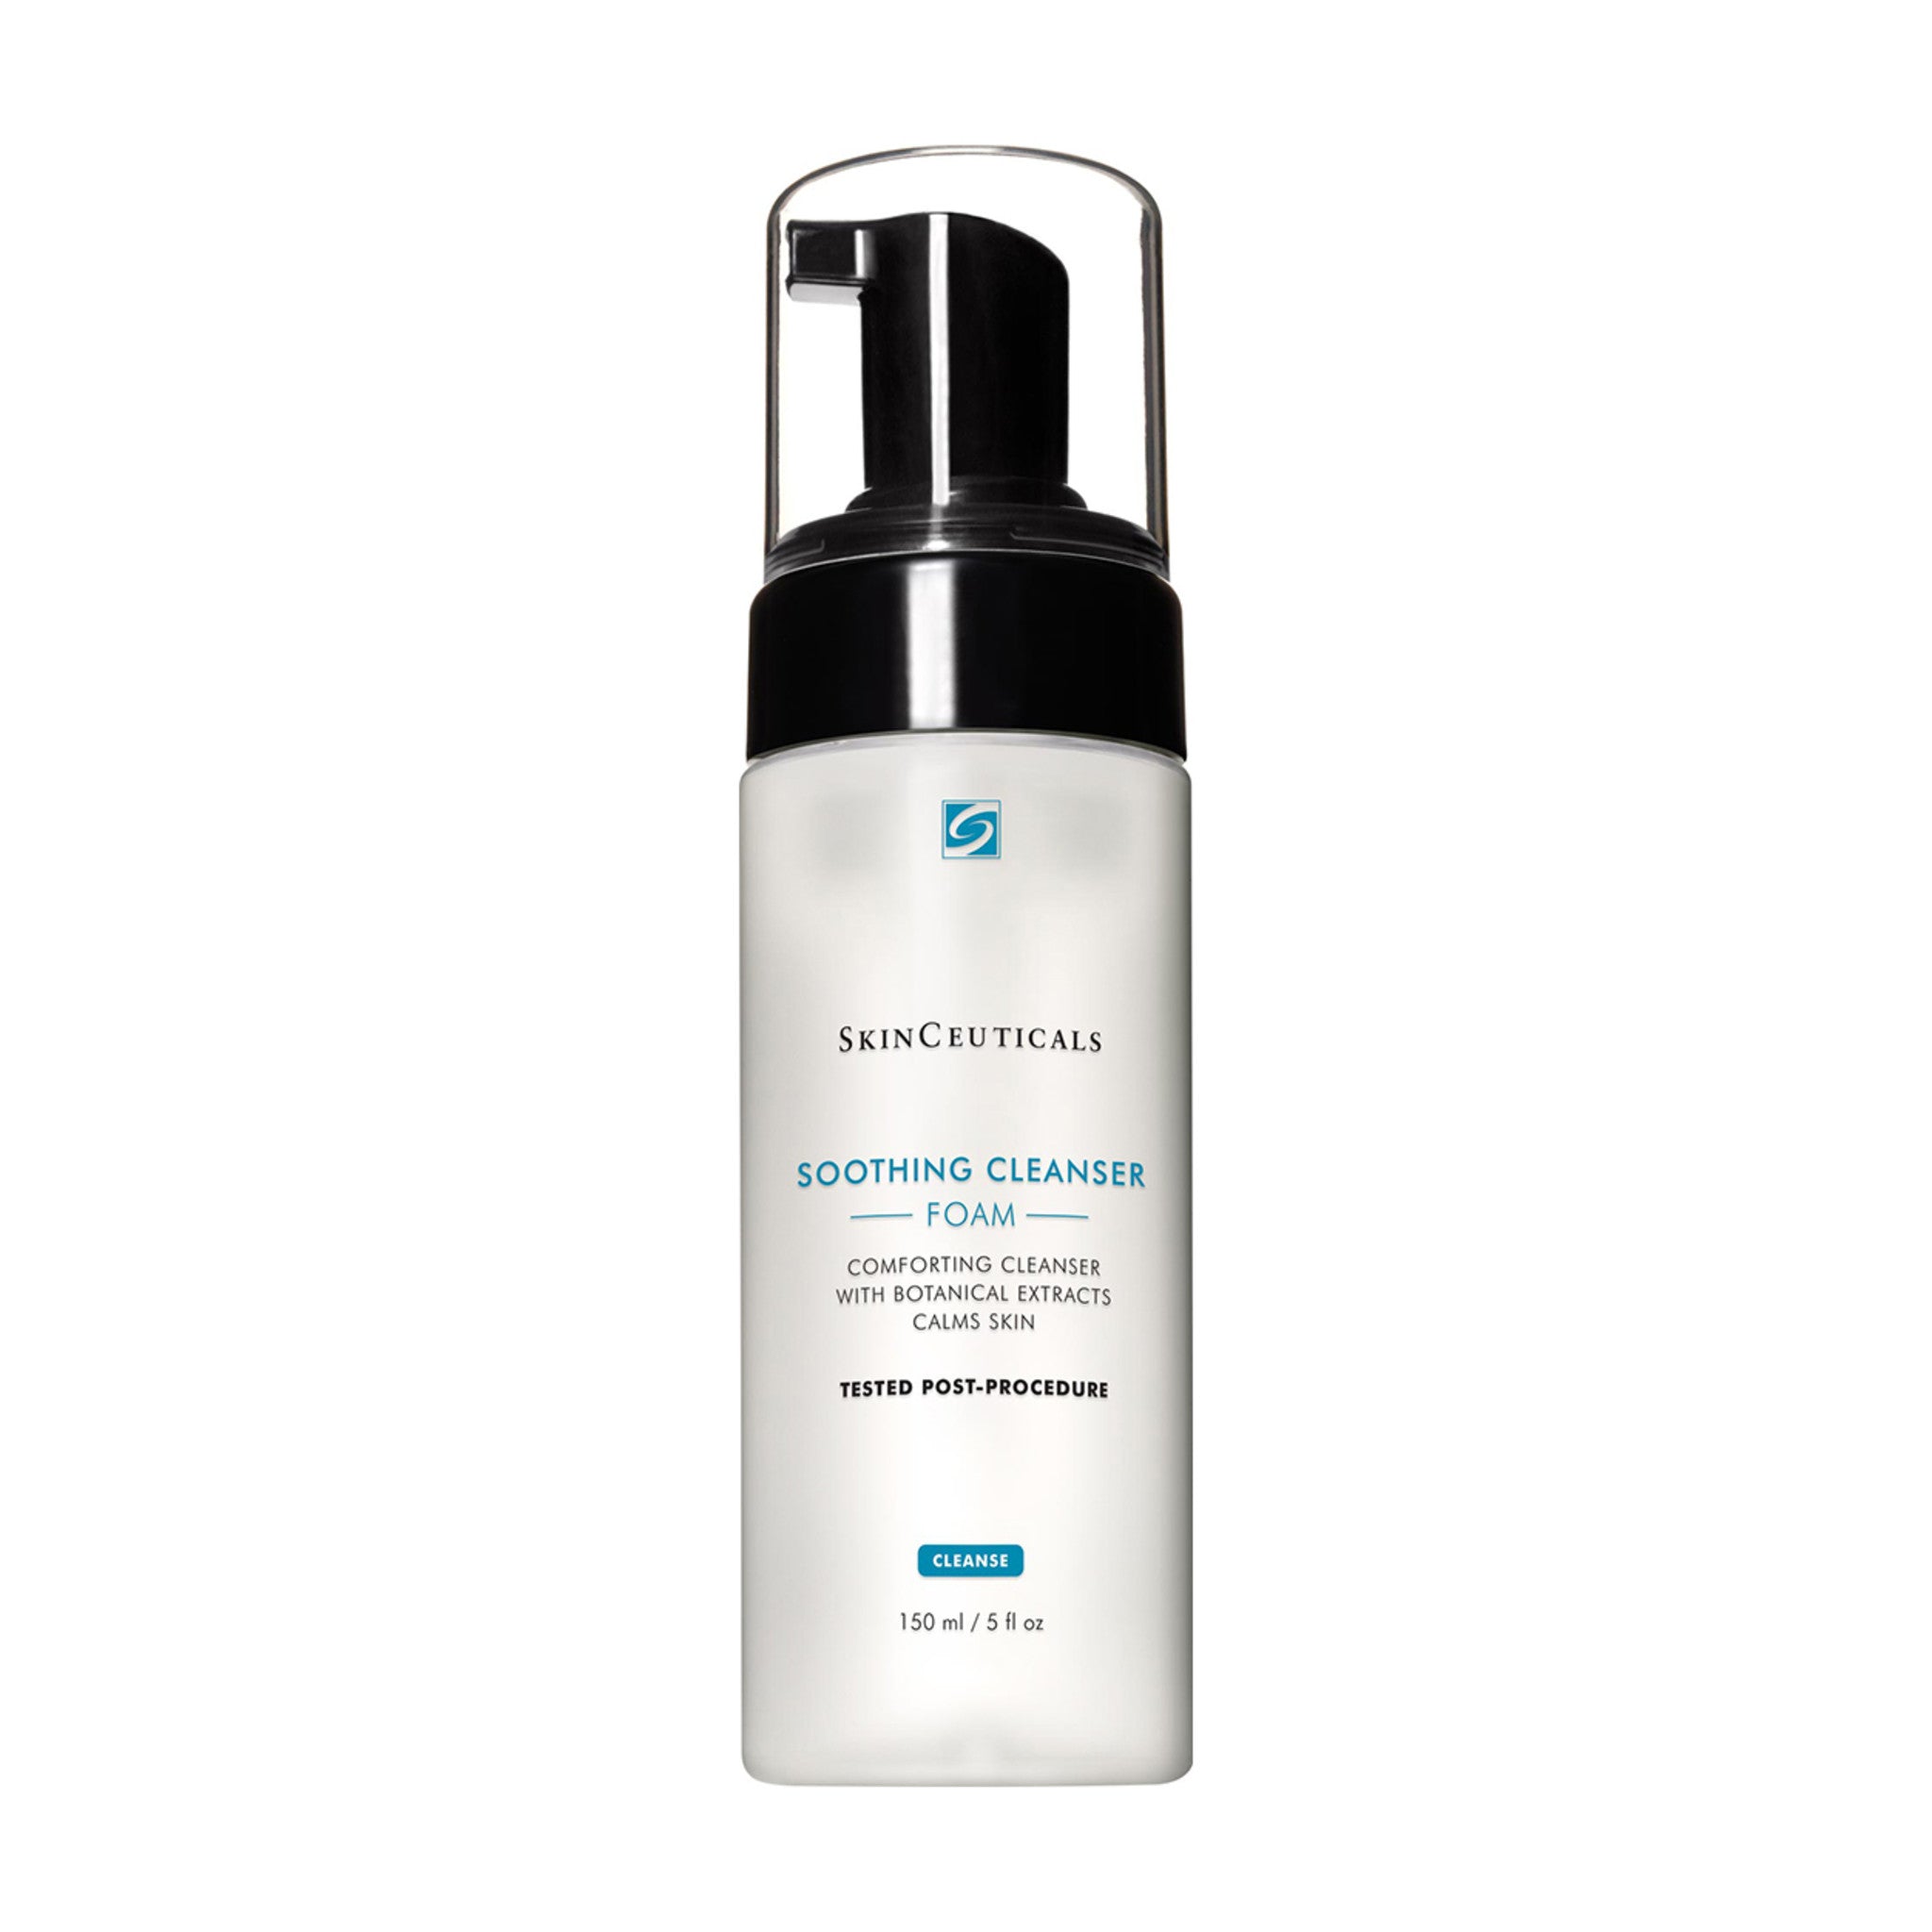 SkinCeuticals Soothing Cleanser main image.